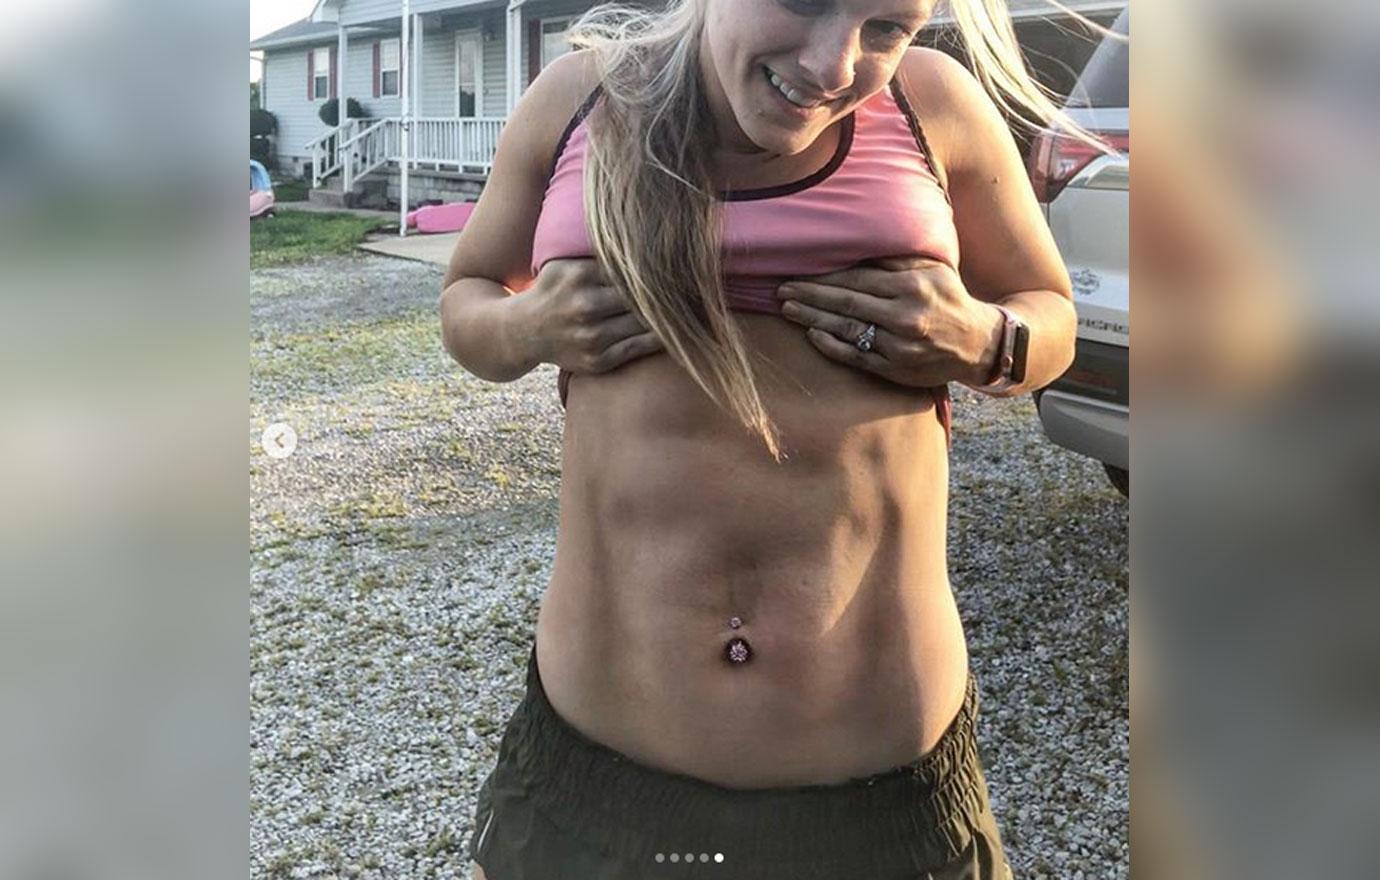 Teen Mom Mackenzie McKee shows off killer physique in just red